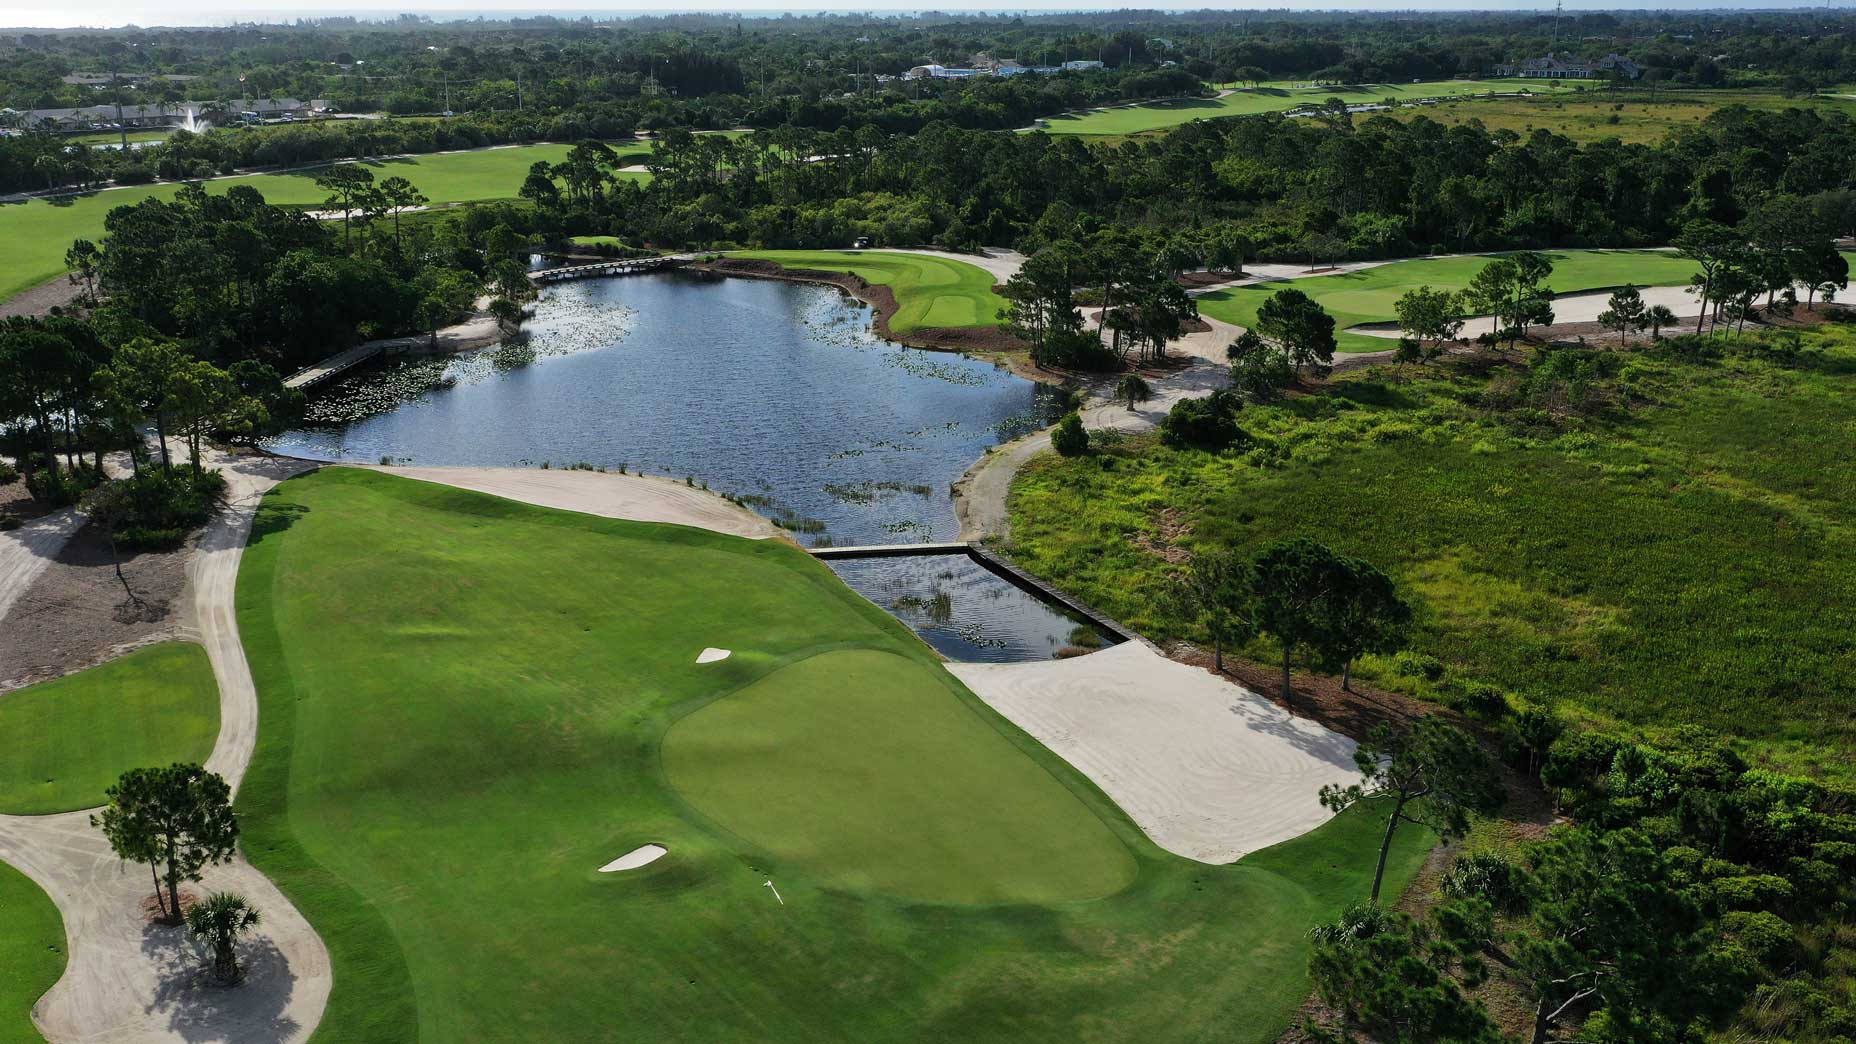 An aerial drone view of the 16th hole at Medalist Golf Club.